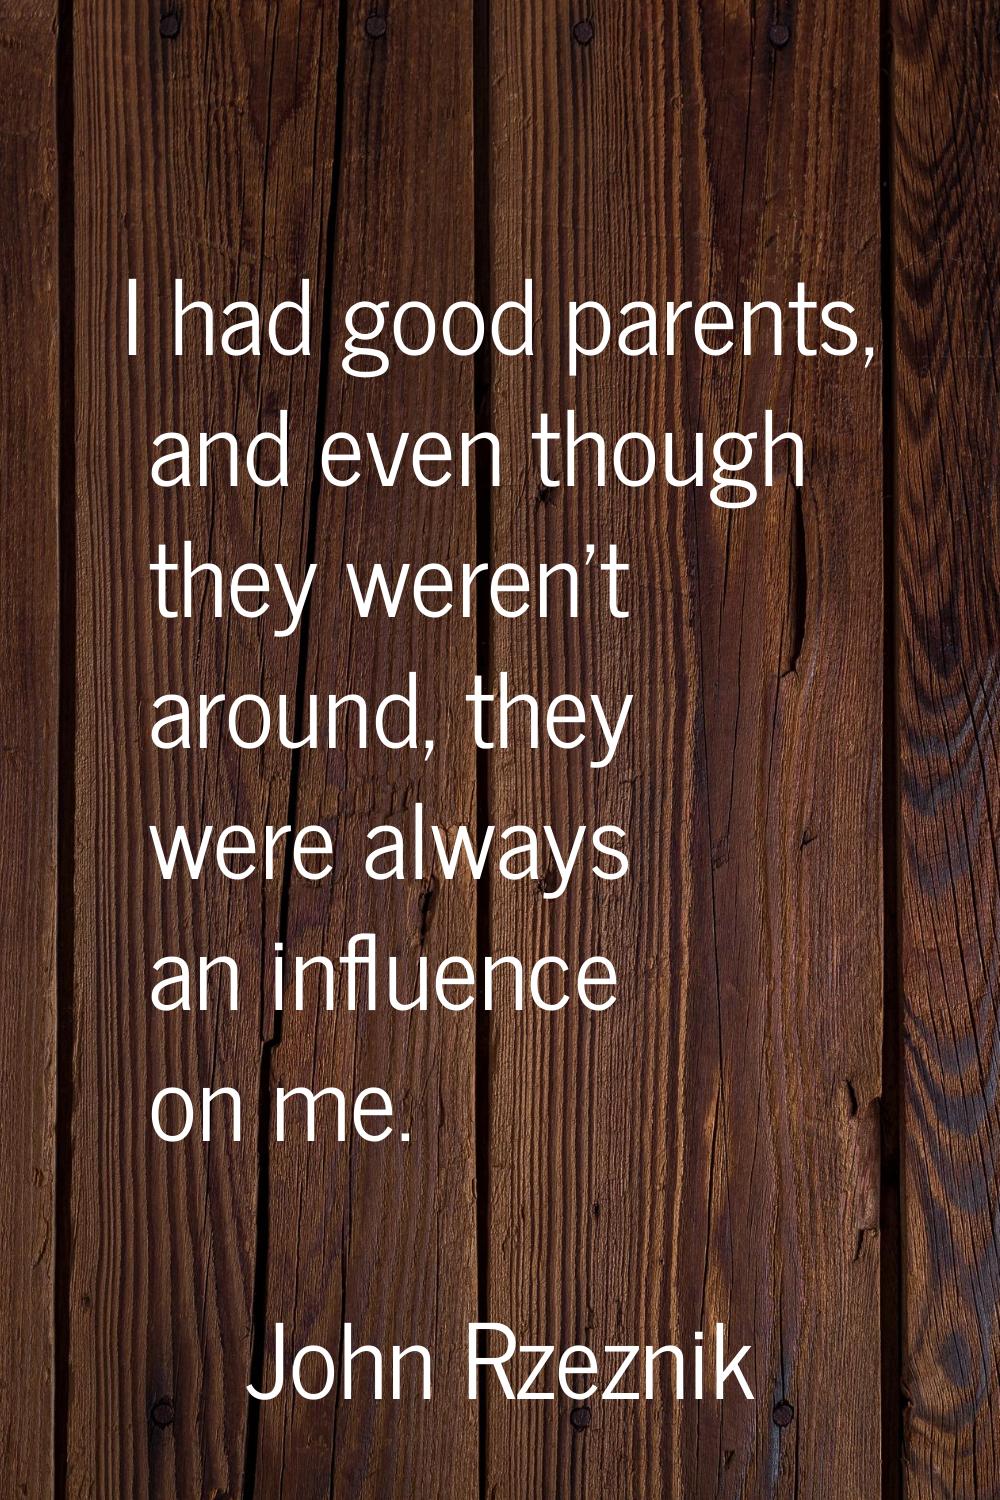 I had good parents, and even though they weren't around, they were always an influence on me.